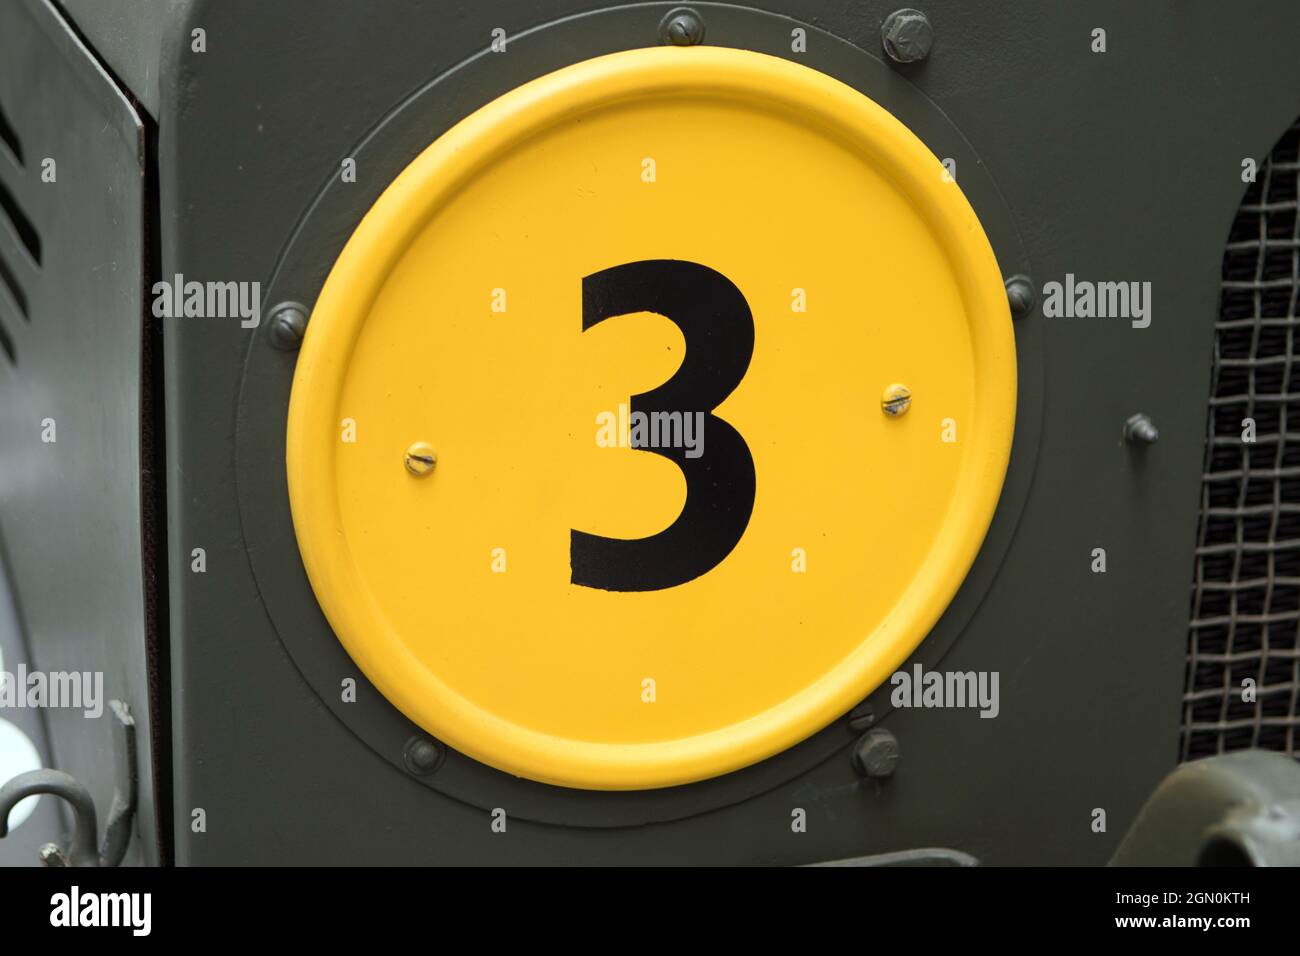 Black Number 3 on a yellow circle Stock Photo